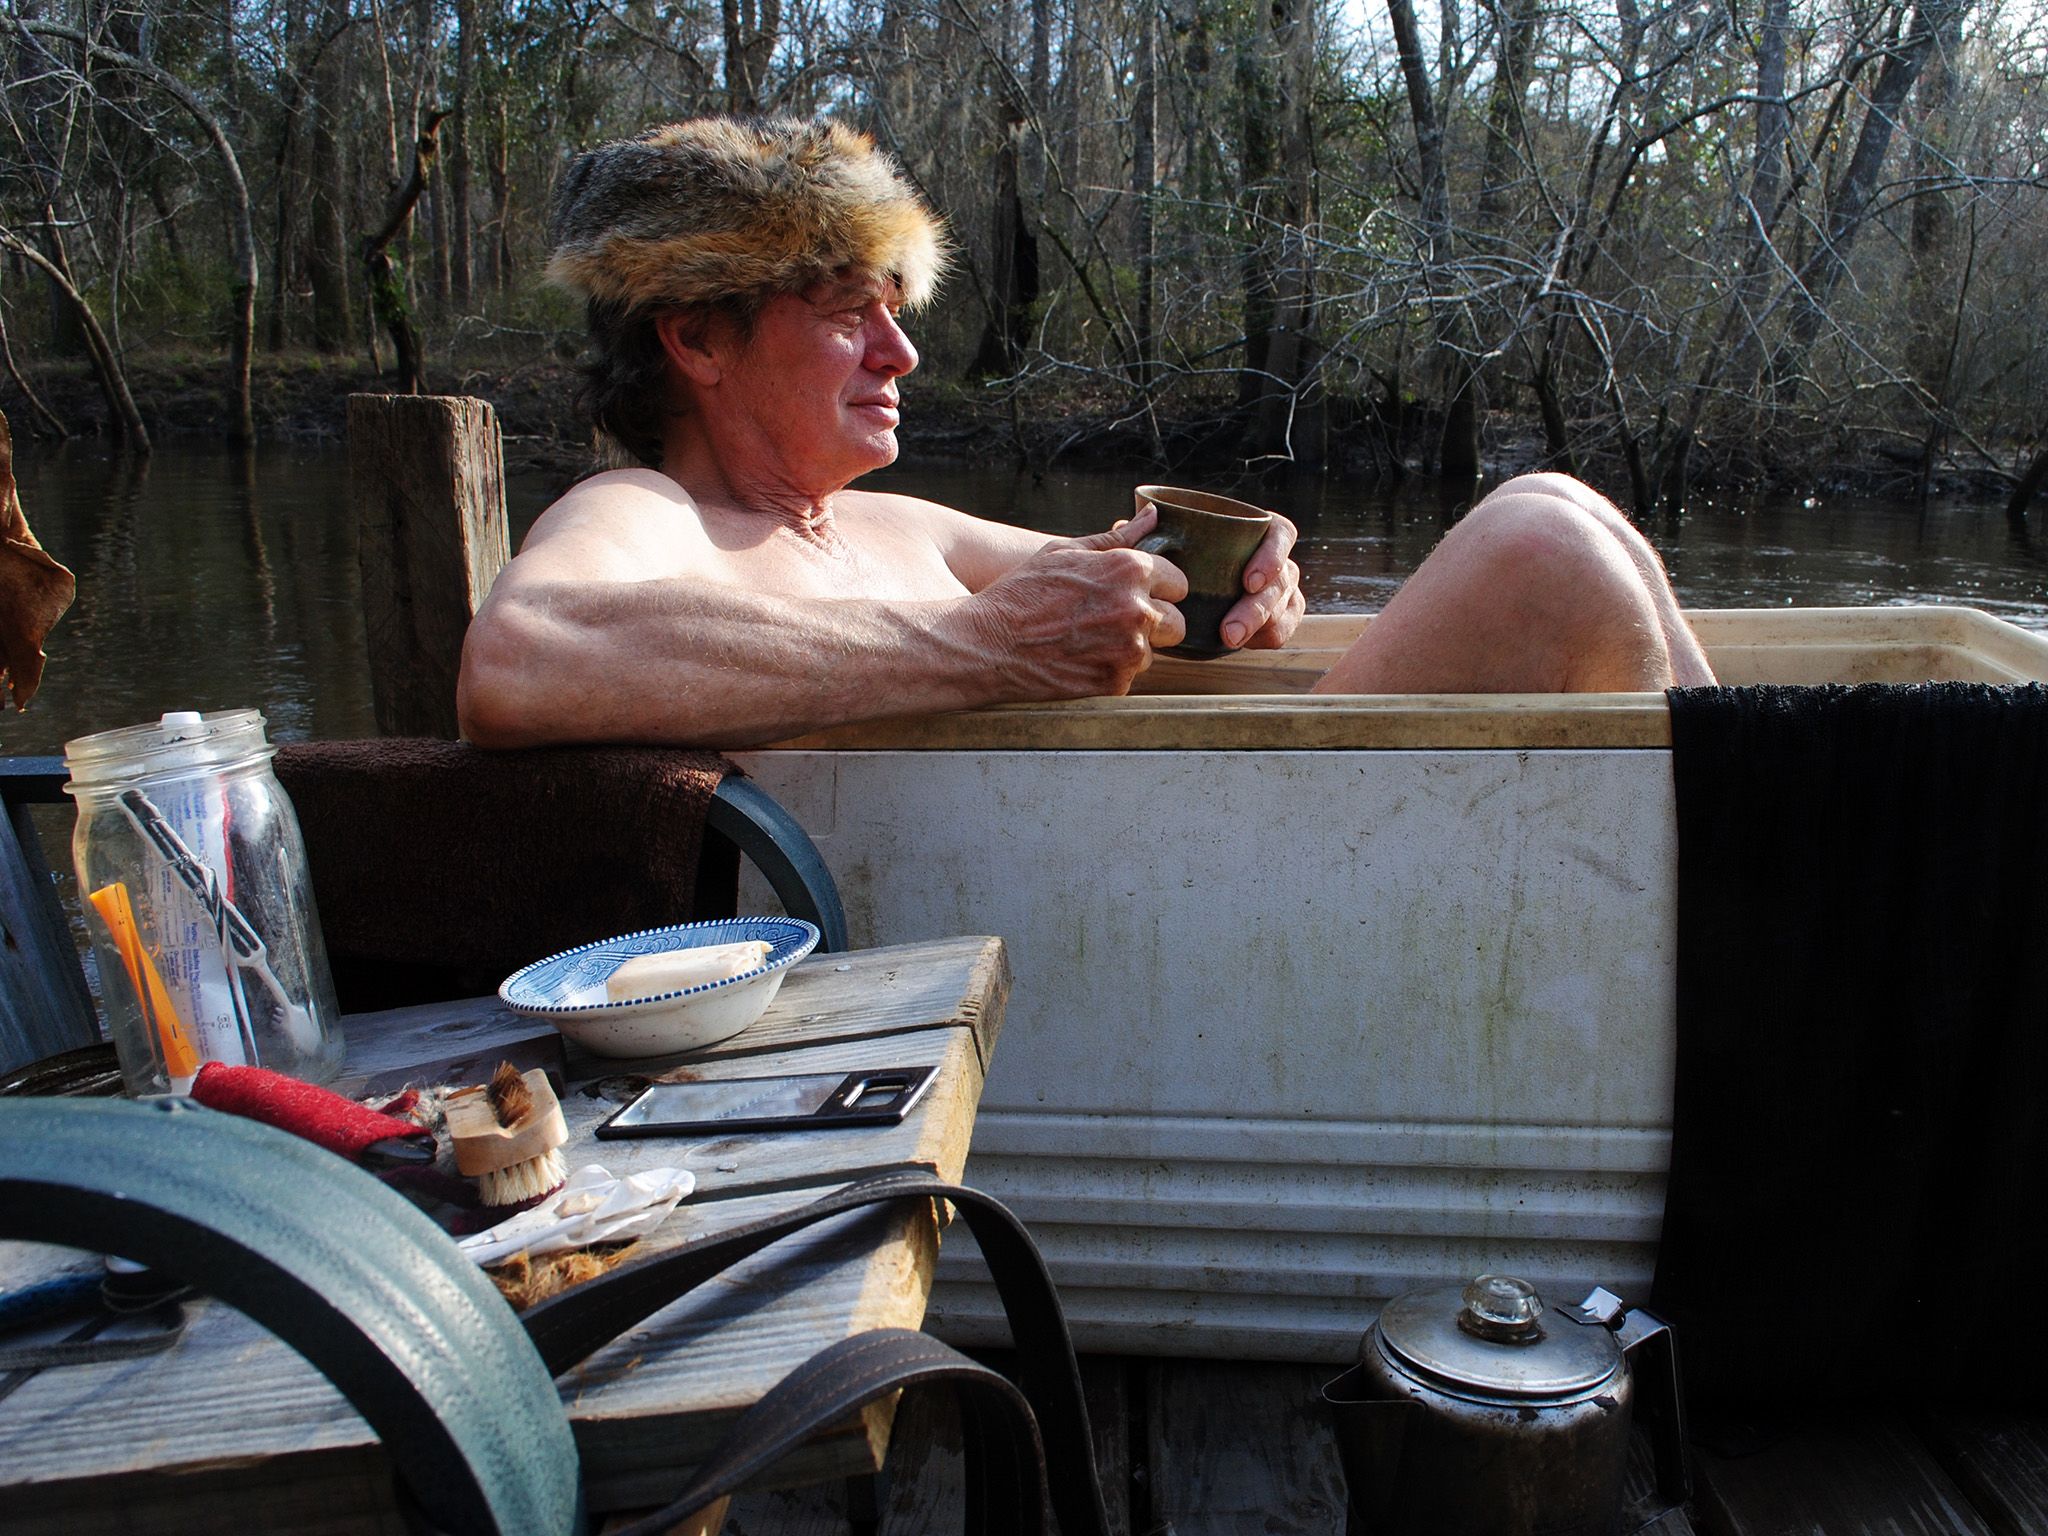 Valdosta, GA, USA: Colbert relaxes in his homemade bath tub. This image is from Live Free or Die. [Photo of the day - December 2014]